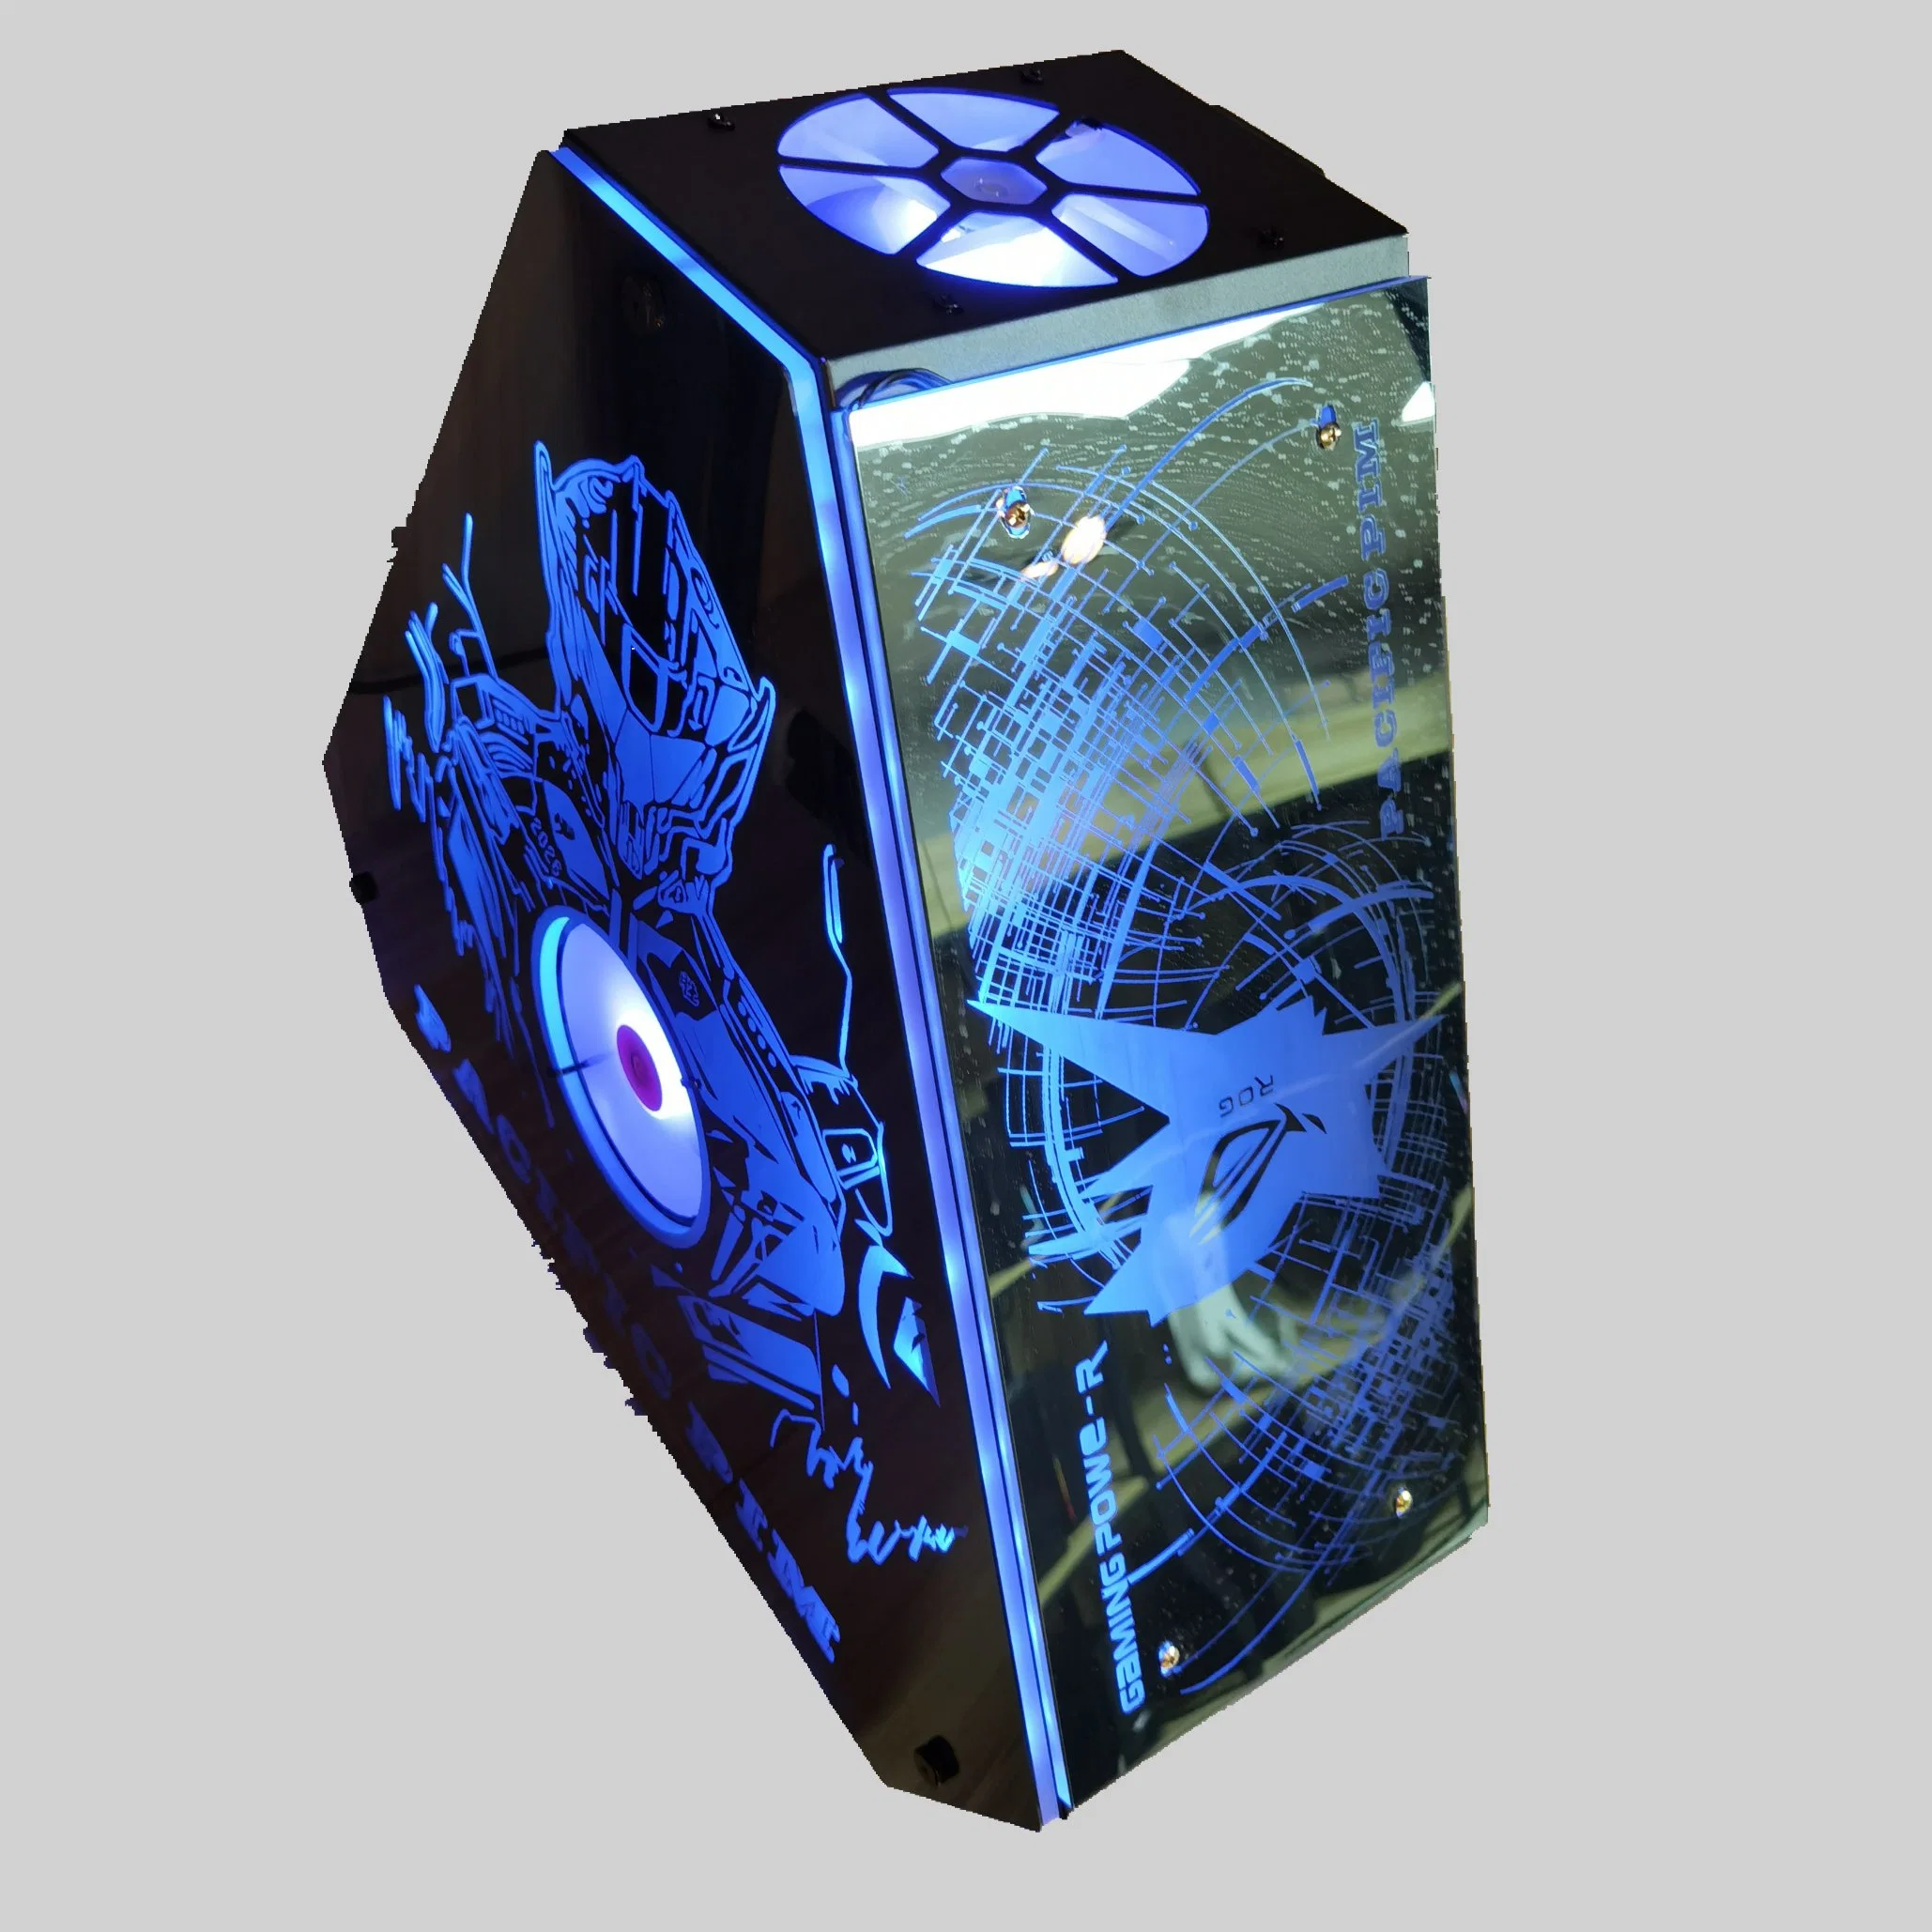 F917 Hotsale Middlel Tower ATX Gaming Computer PC Case with RGB Light Board USB3.0, 0.9mm SPCC, Glass Side Panel, Popular Model, Special Design